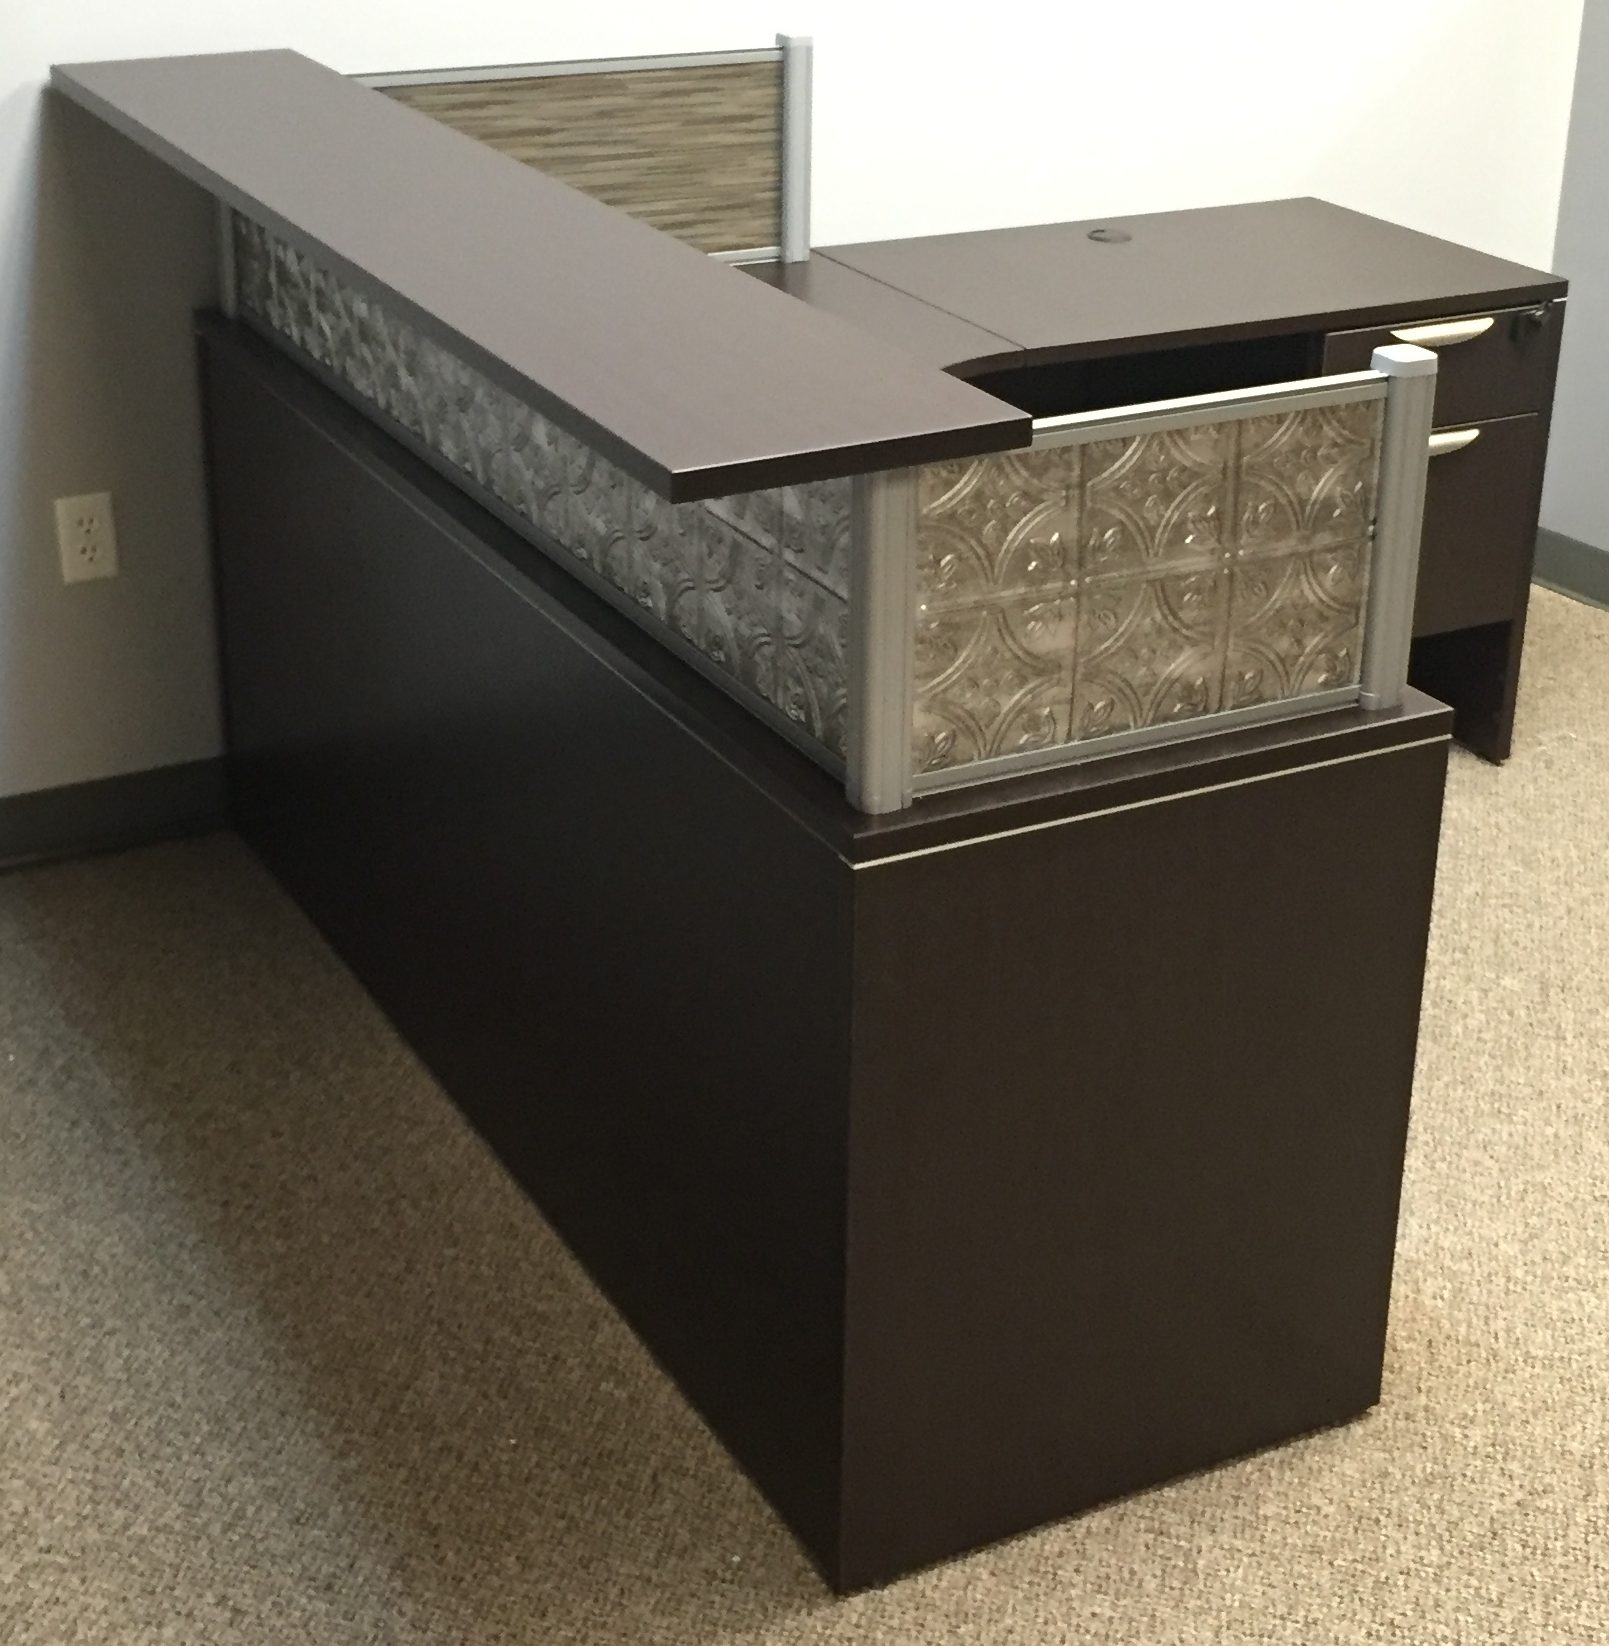 Rustic L Shape Borders Reception Desk With Faux Hammered Tin